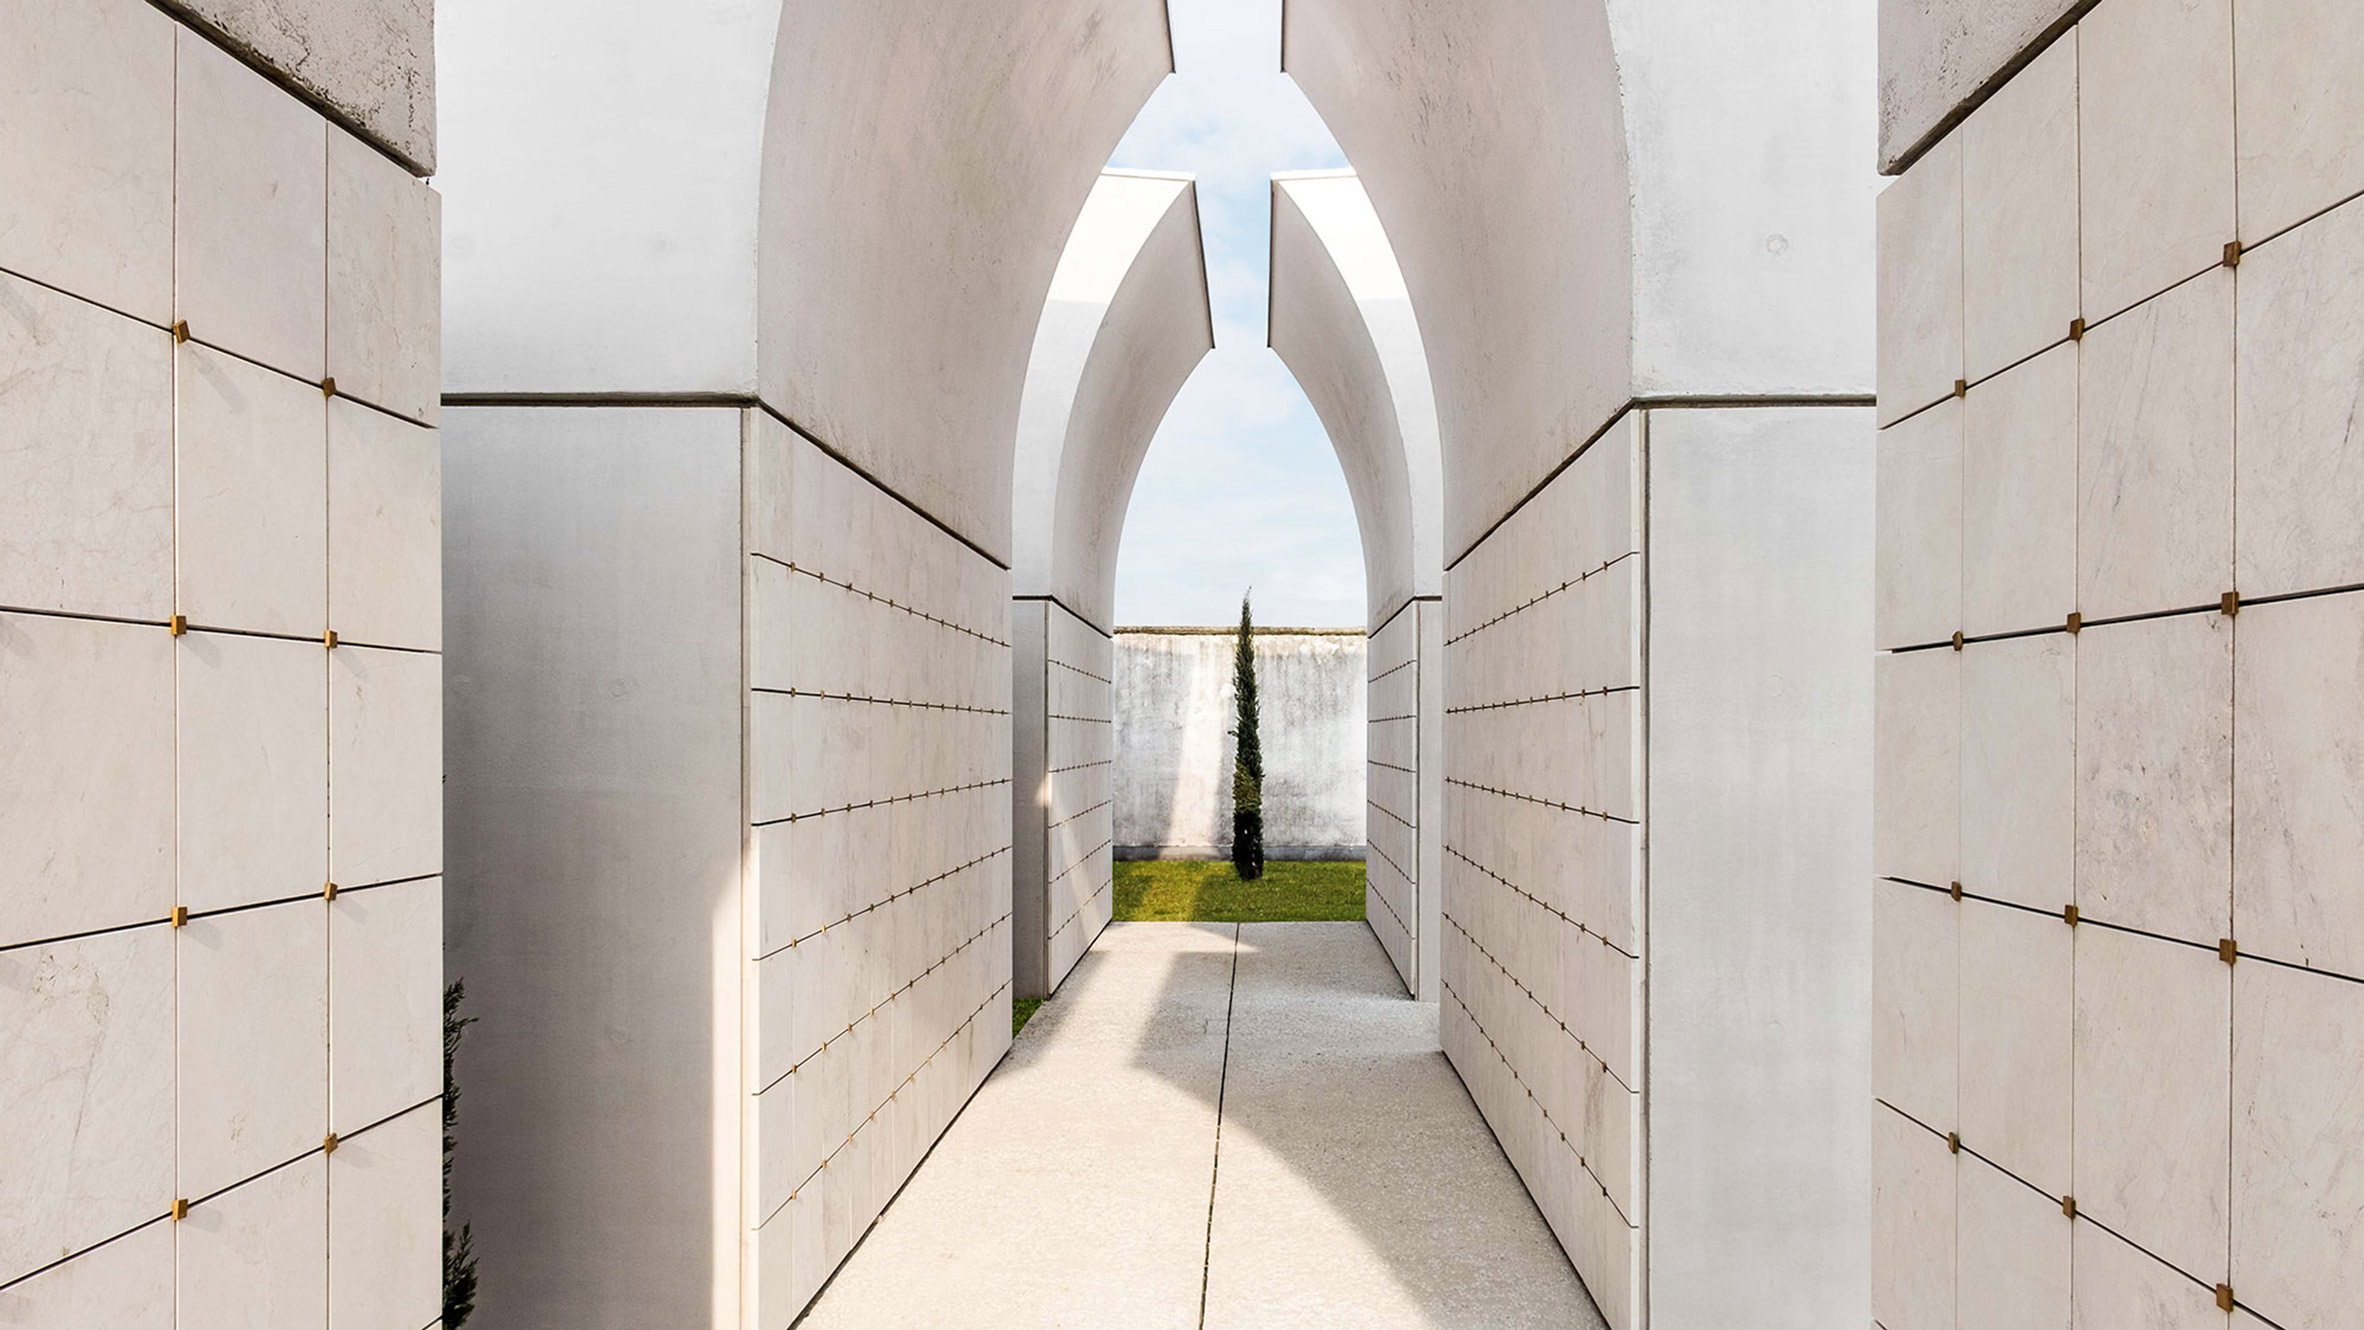 Marble architecture and design projects | Dezeen magazine